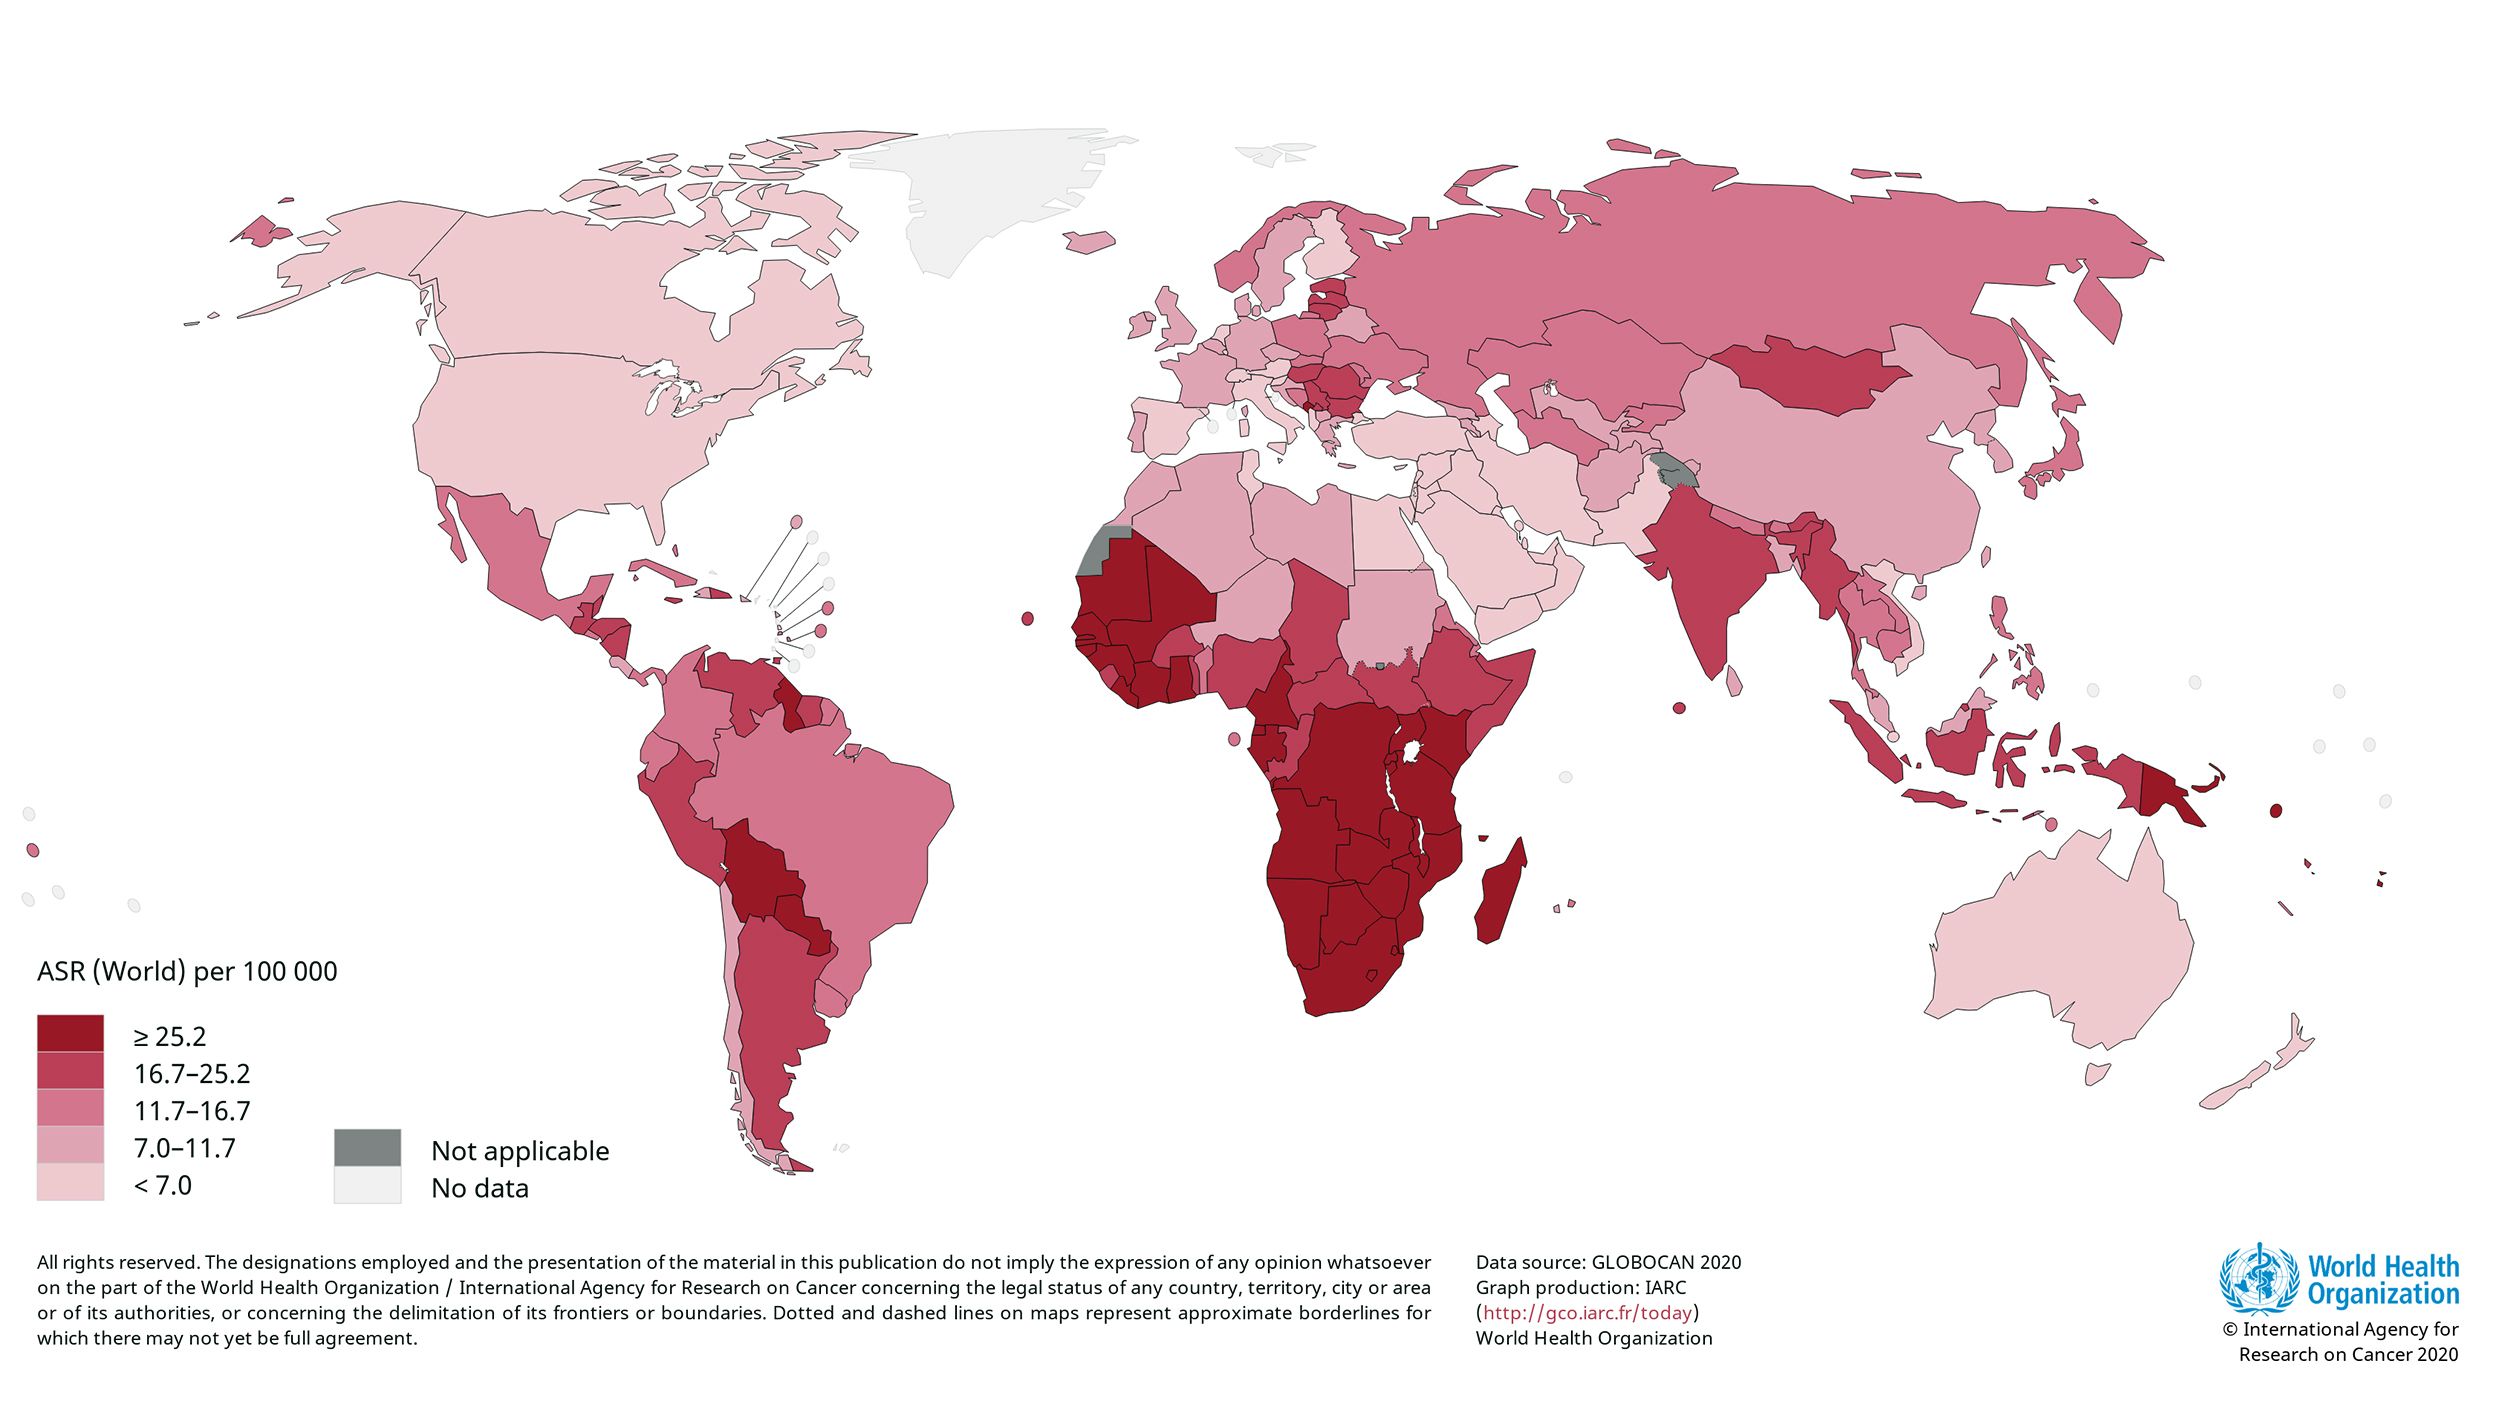 Estimated age-standardized incidence rates (World) in 2020